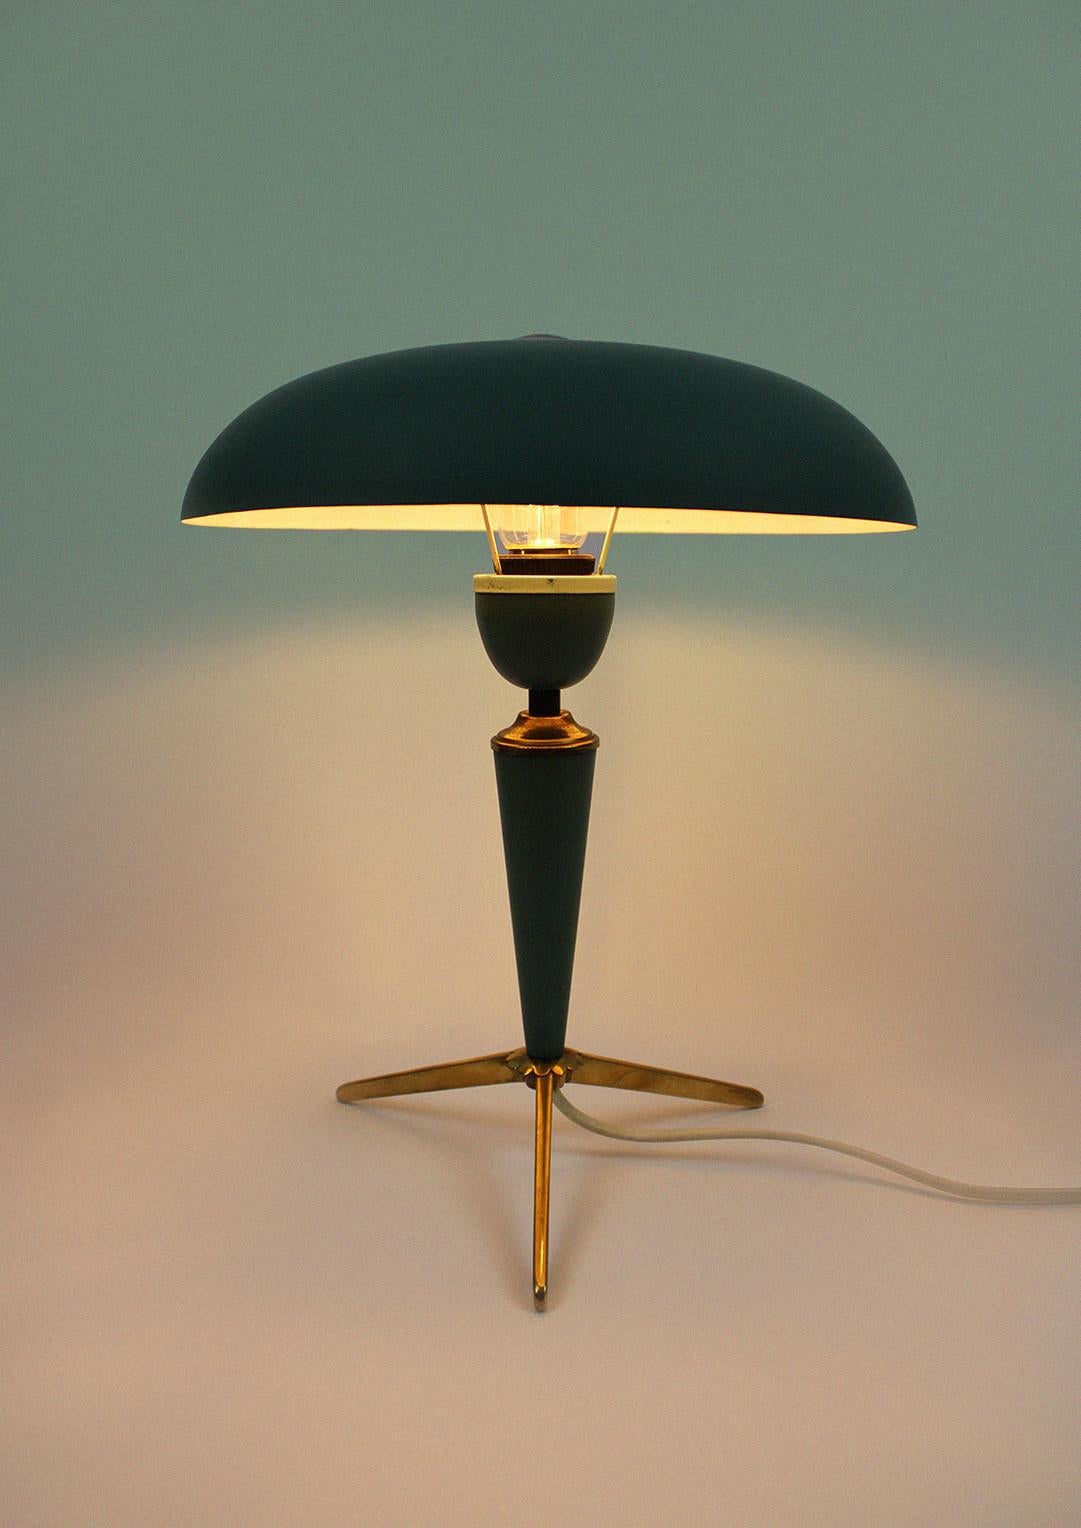 The stylish 'Bijou' desk or table lamp by Dutch designer Louis Kalff, which was made for the manufacturer Philips is a beautiful icon from the Spage Age era. This 1950s model is in particularly good condition and consists of metal and brass. The